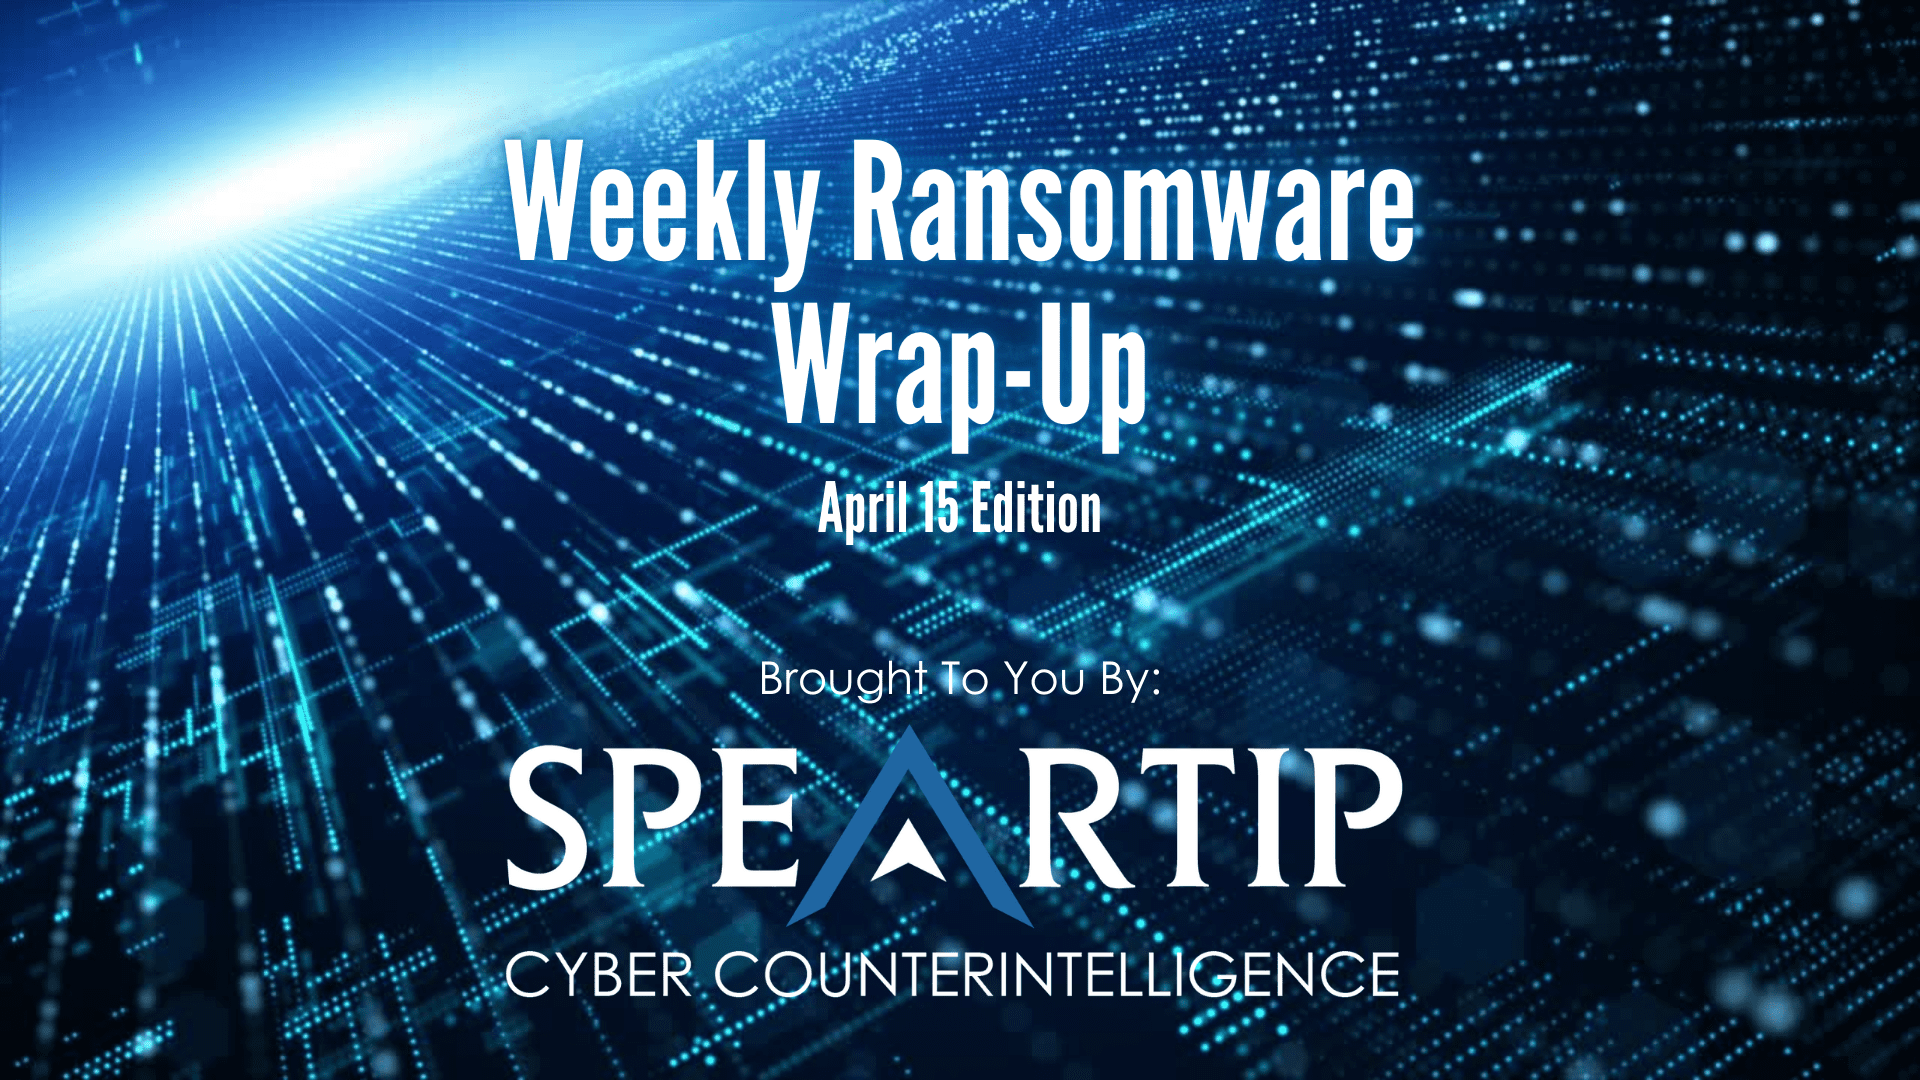 April 15_Weekly Ransomware Wrap-Up